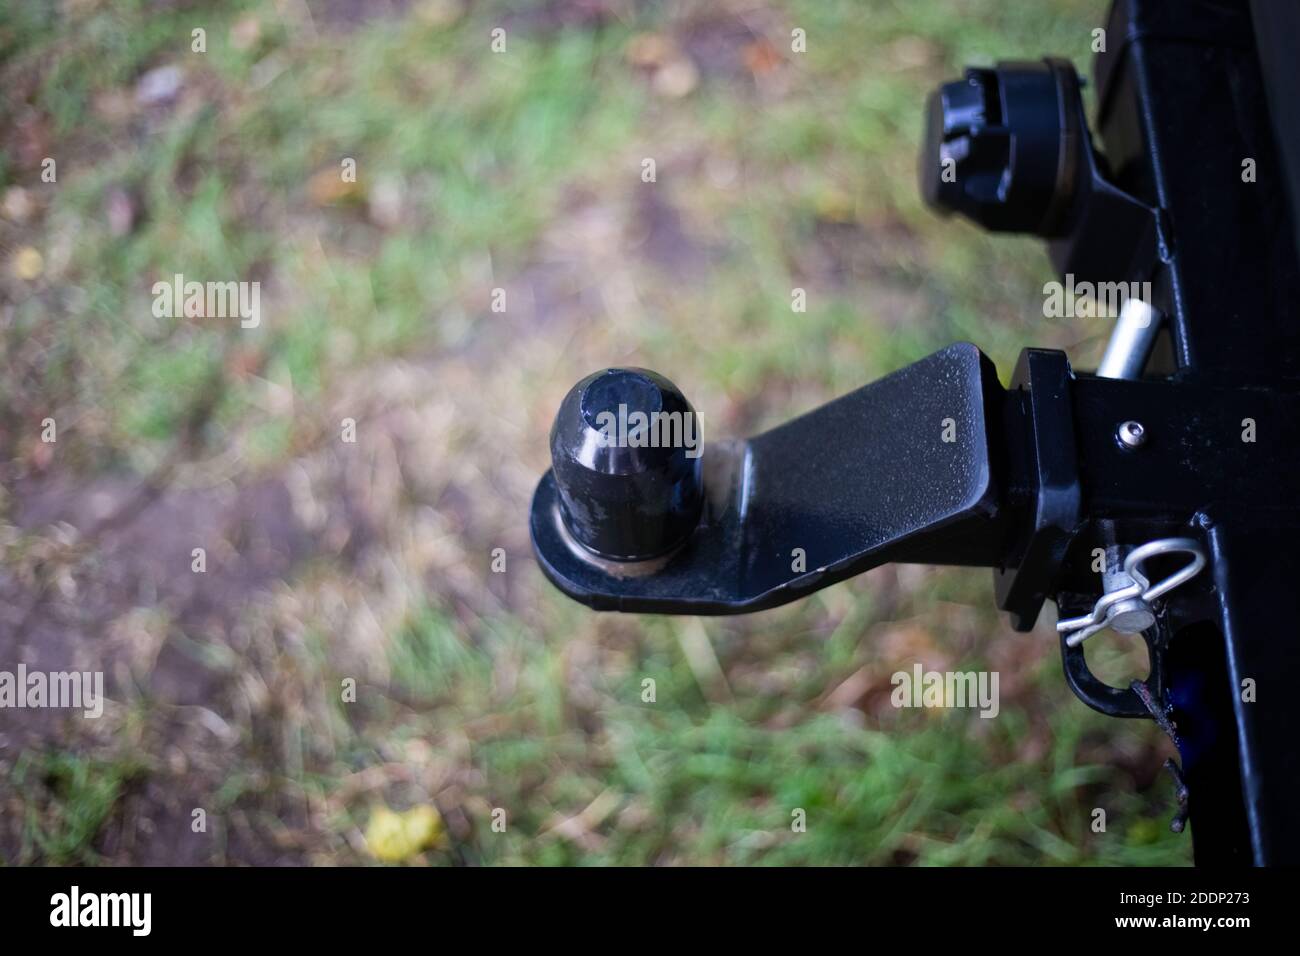 iron hitch for a caravan on the rear bumper of the car. Stock Photo